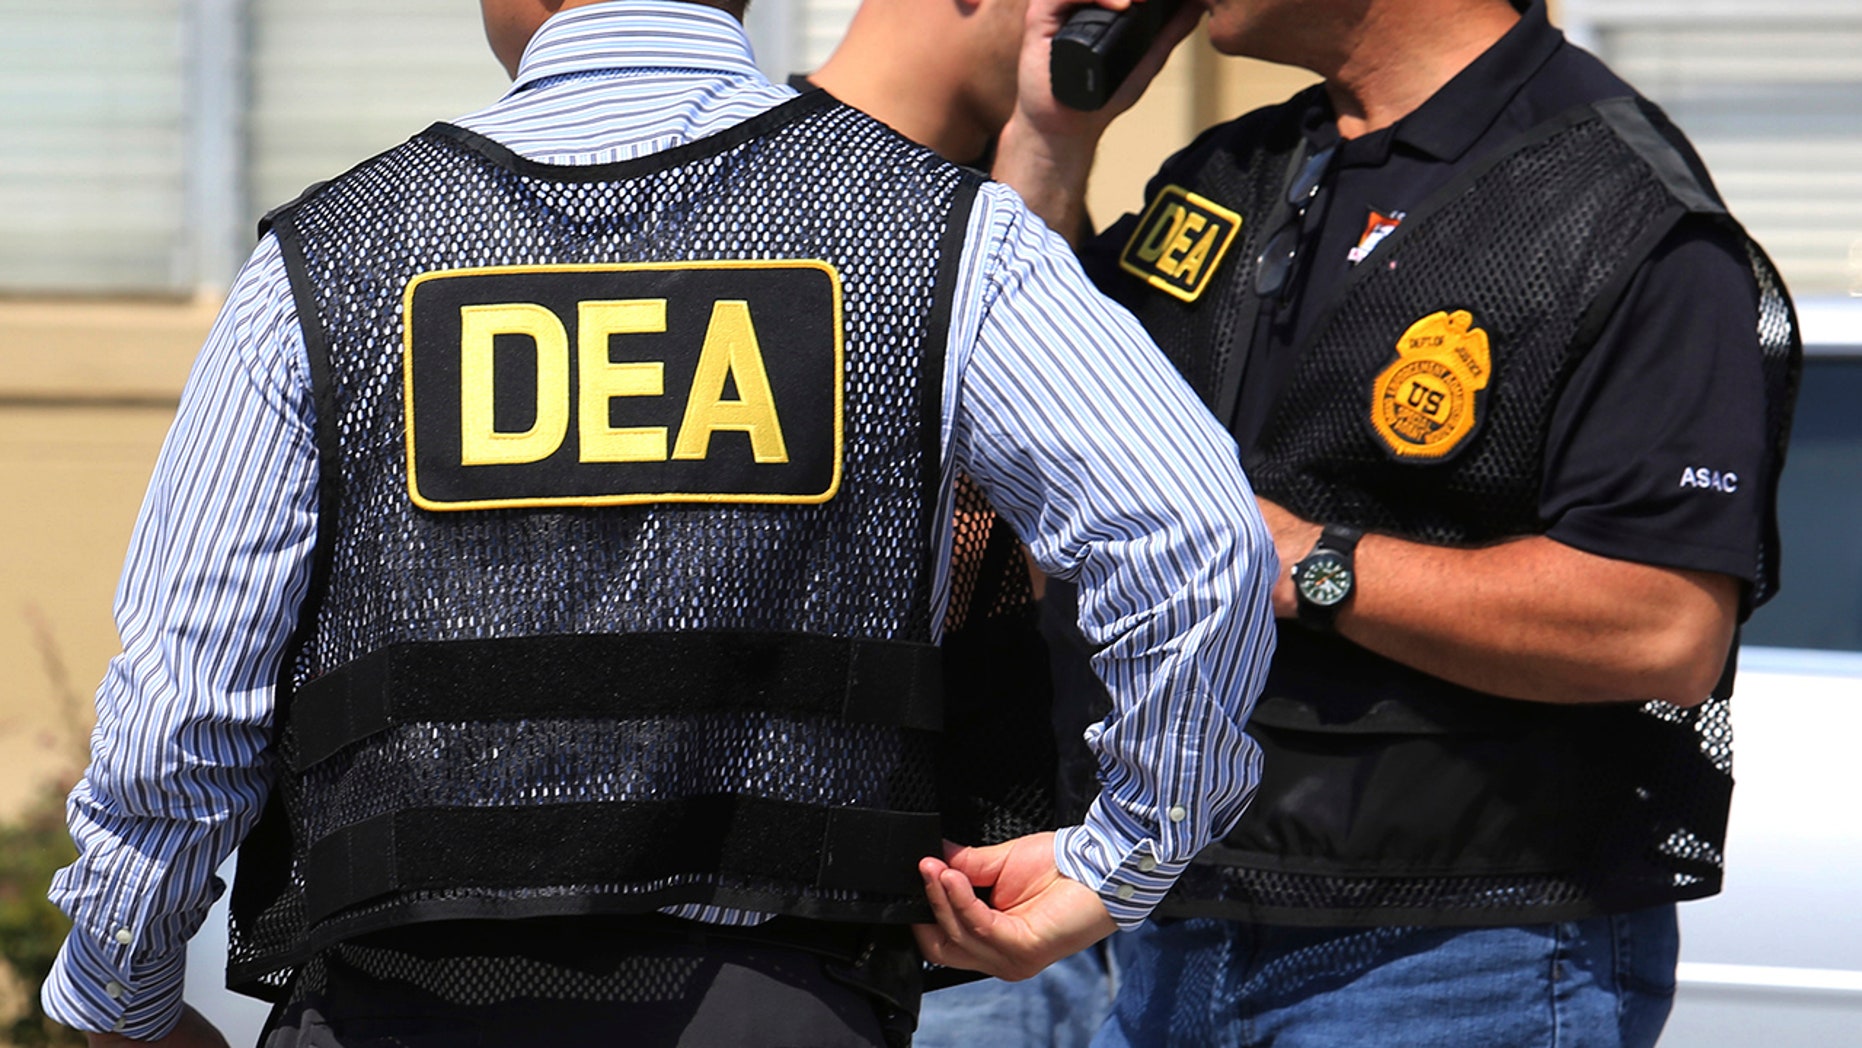 Veteran #39 star #39 DEA agent conspired with Colombia drug cartels to